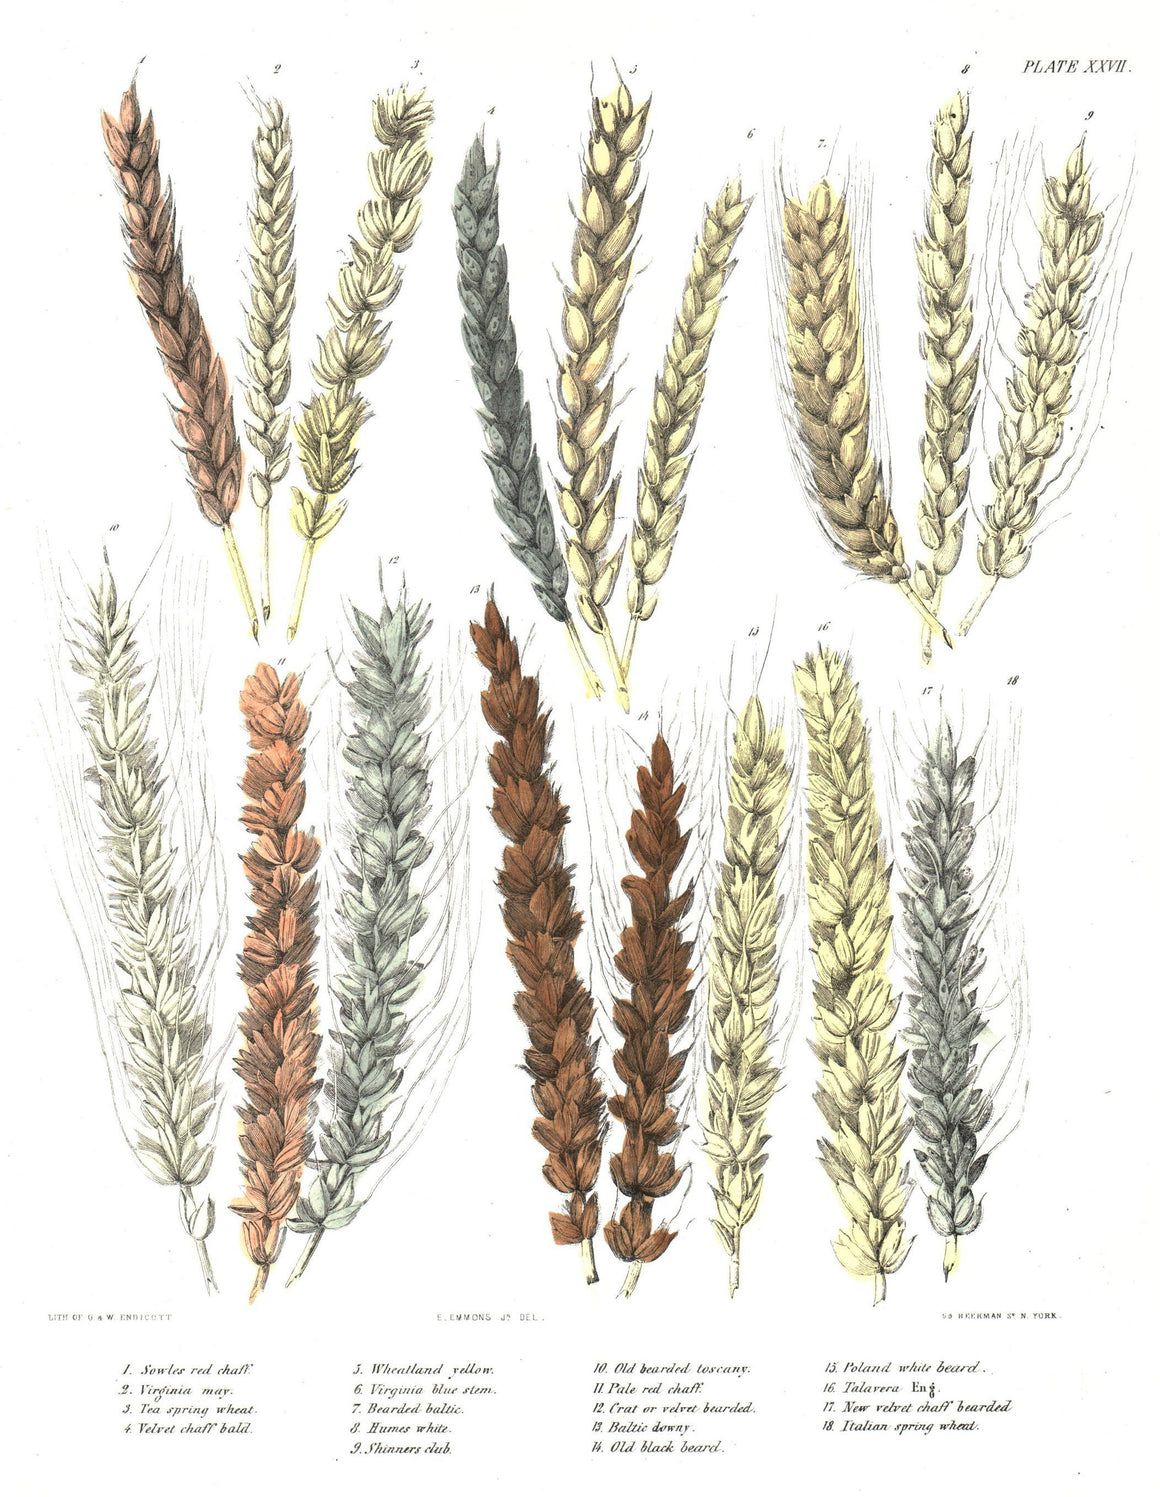 1849 Pl 27 18 Strains of Wheat - Emmons